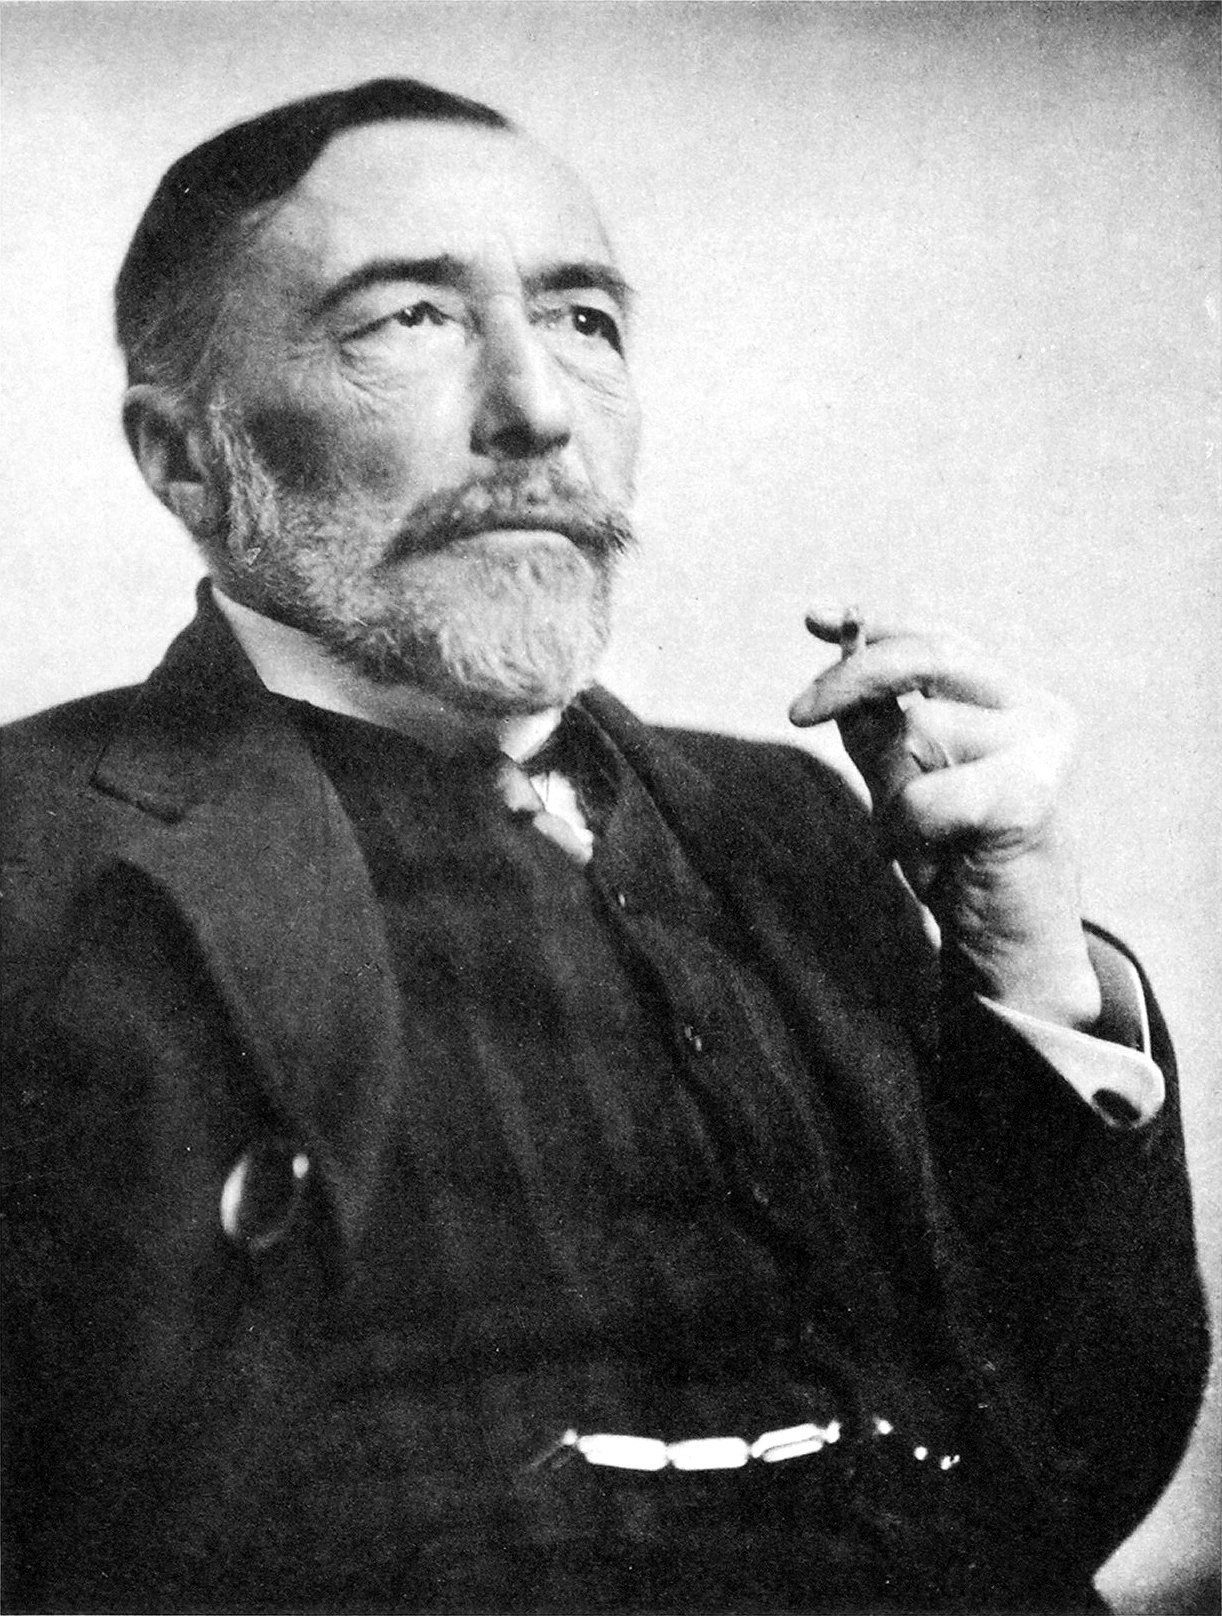 A black-and-white portrait of an older man with a beard, holding a monocle to his eye. He is dressed in a suit and looks off into the distance.